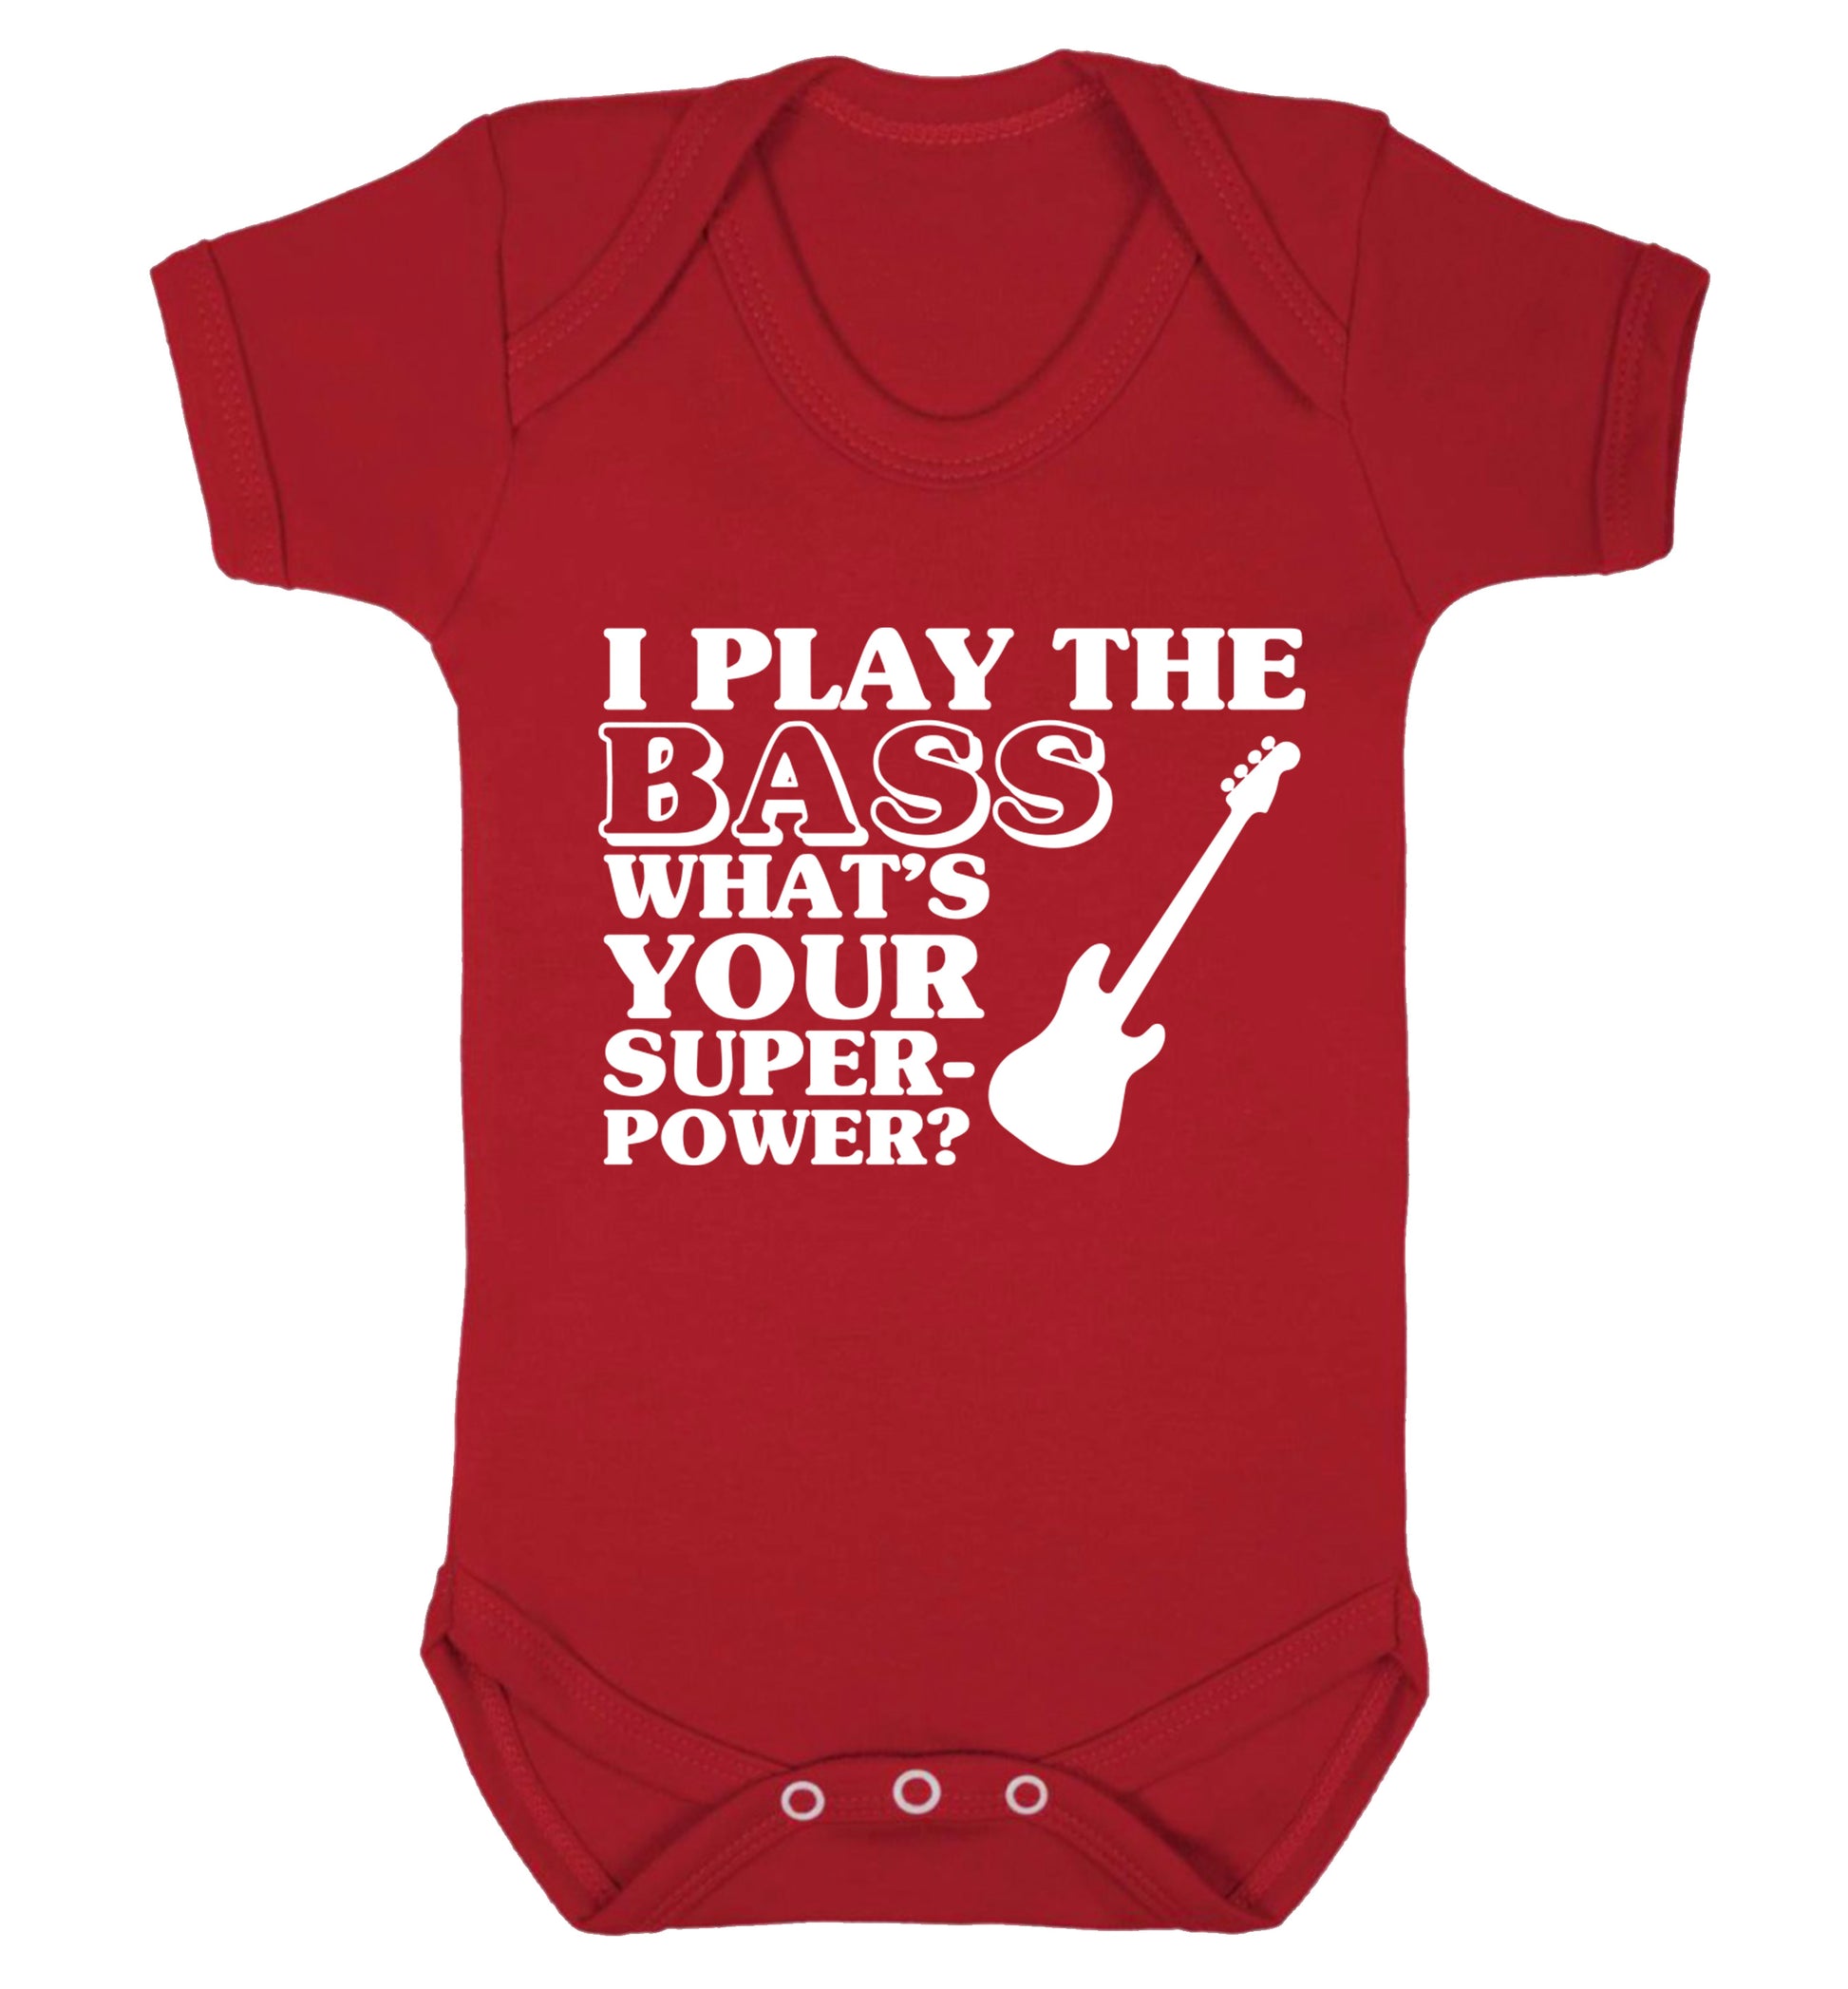 I play the bass what's your superpower? Baby Vest red 18-24 months